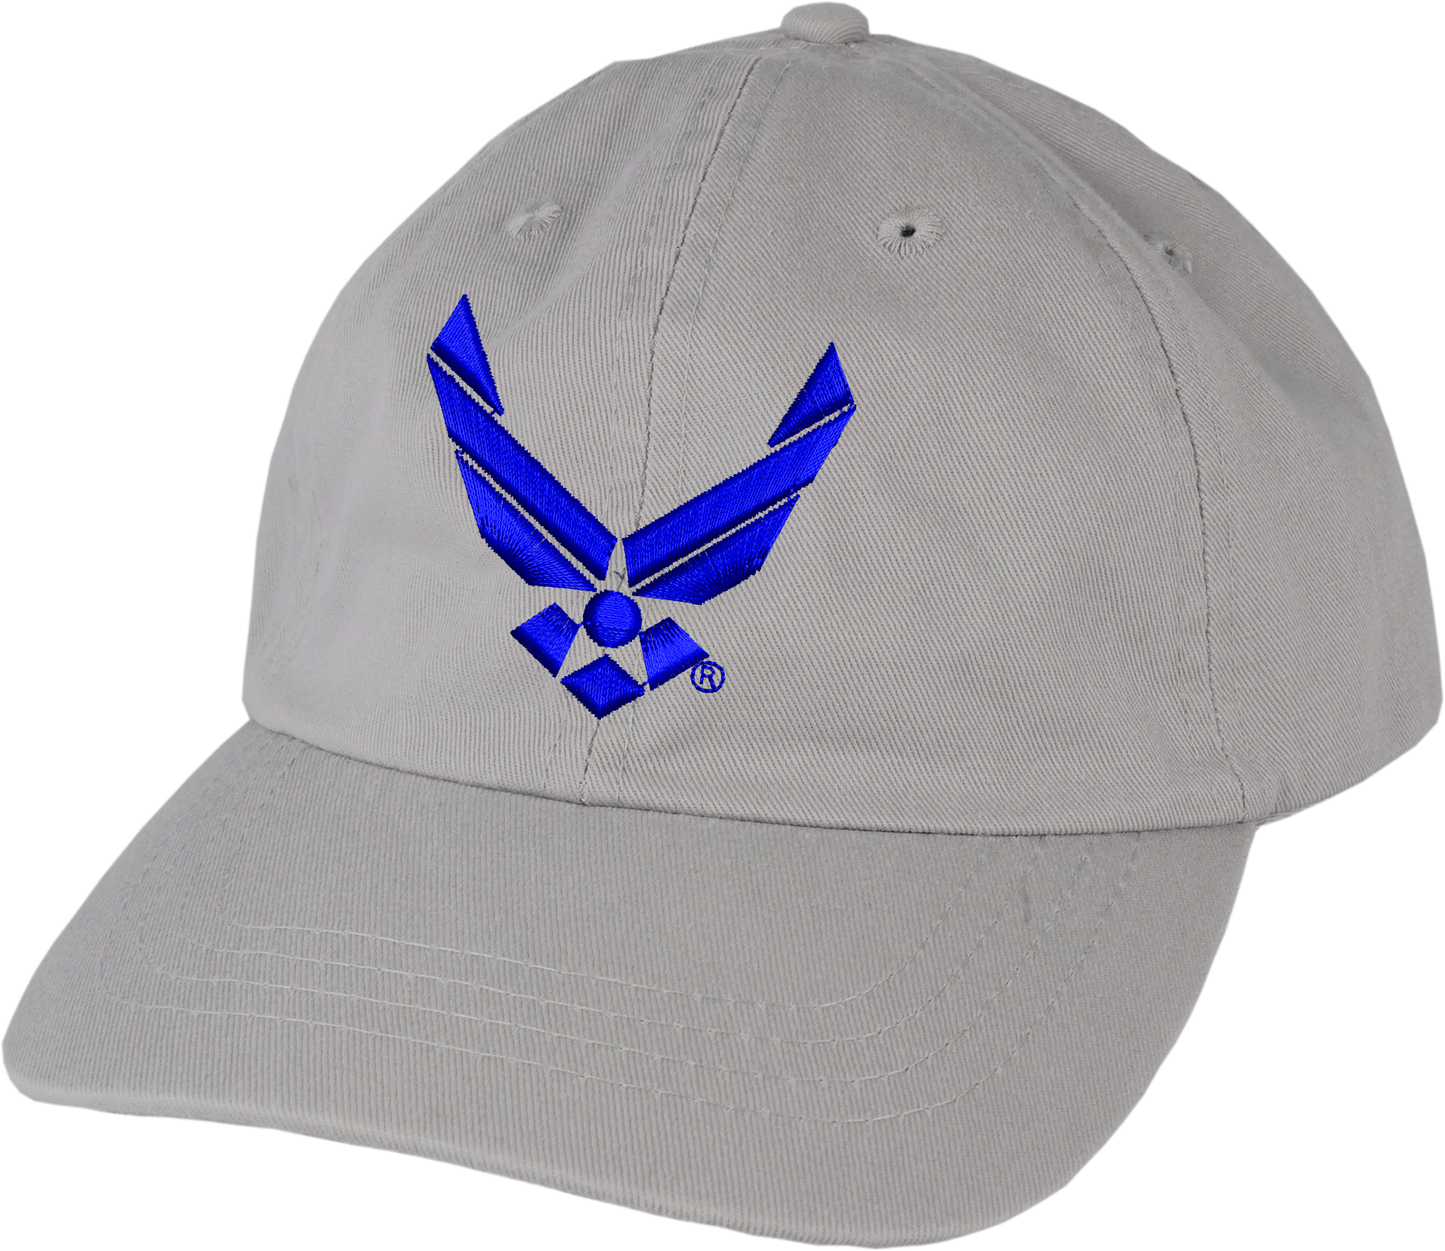 U.S. Air Force Symbol on Grey Unstructured Cap